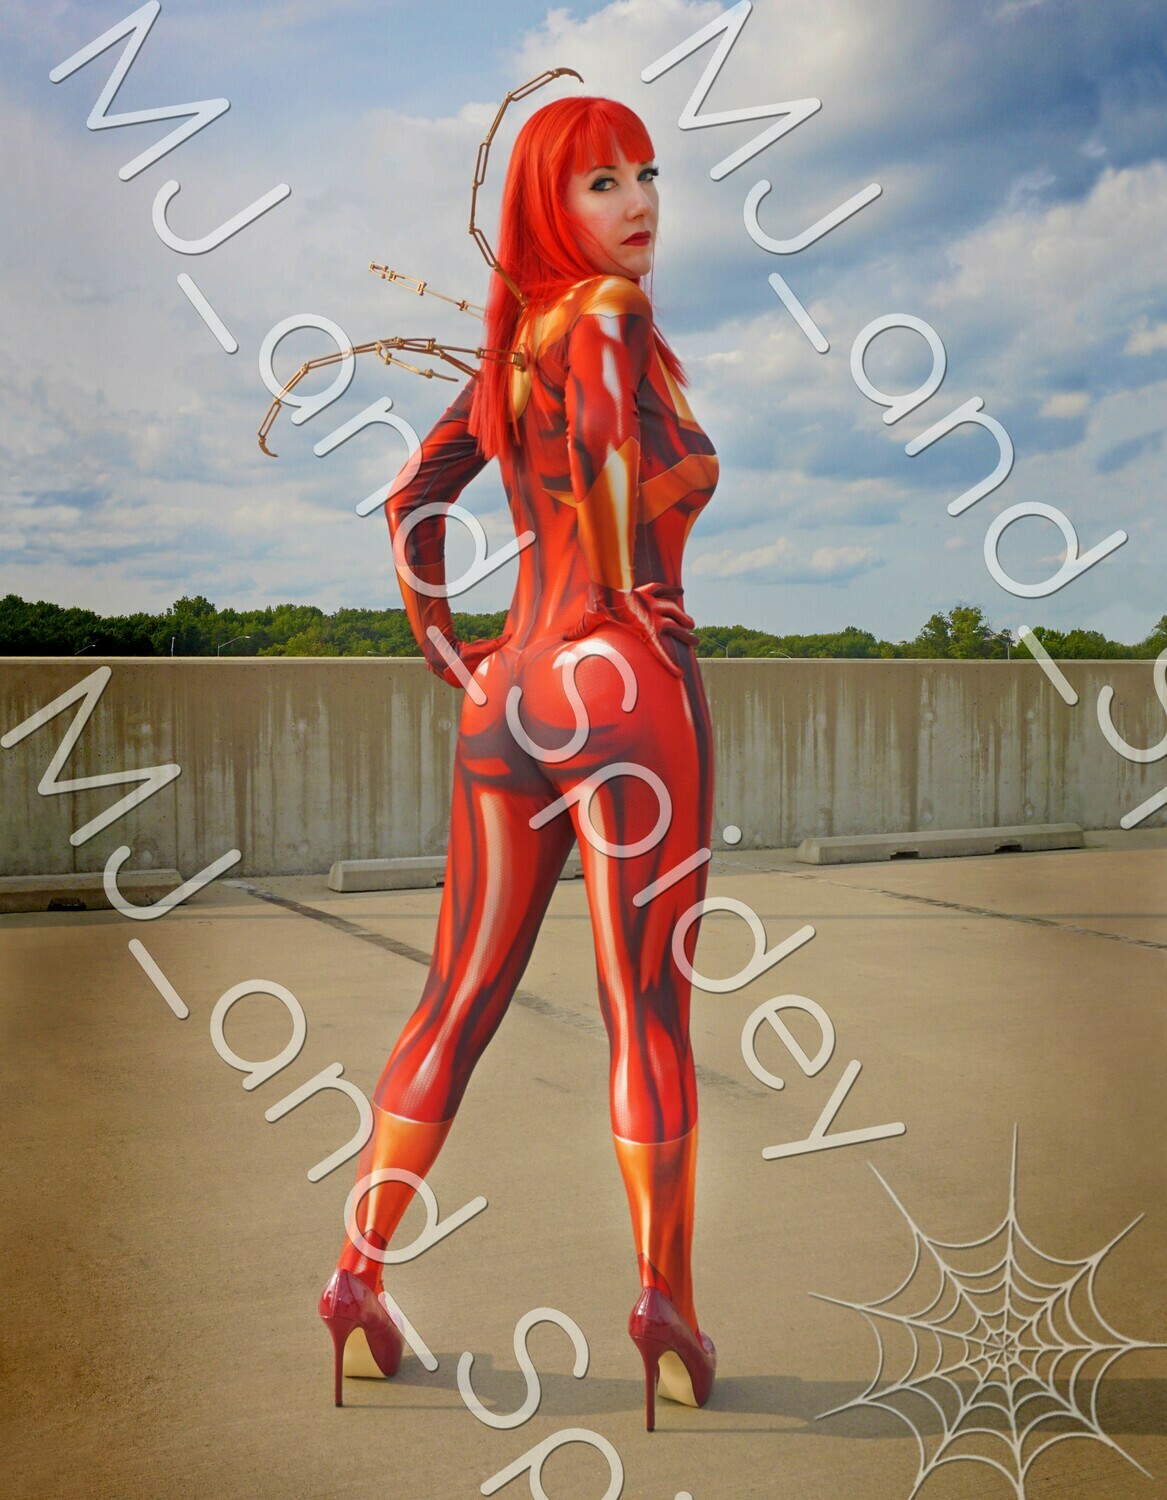 Marvel - Spider-Man - Mary Jane Watson - Iron Spider 5 - Digital Cosplay Image (@MJ_and_Spidey, MJ and Spidey, Comics)